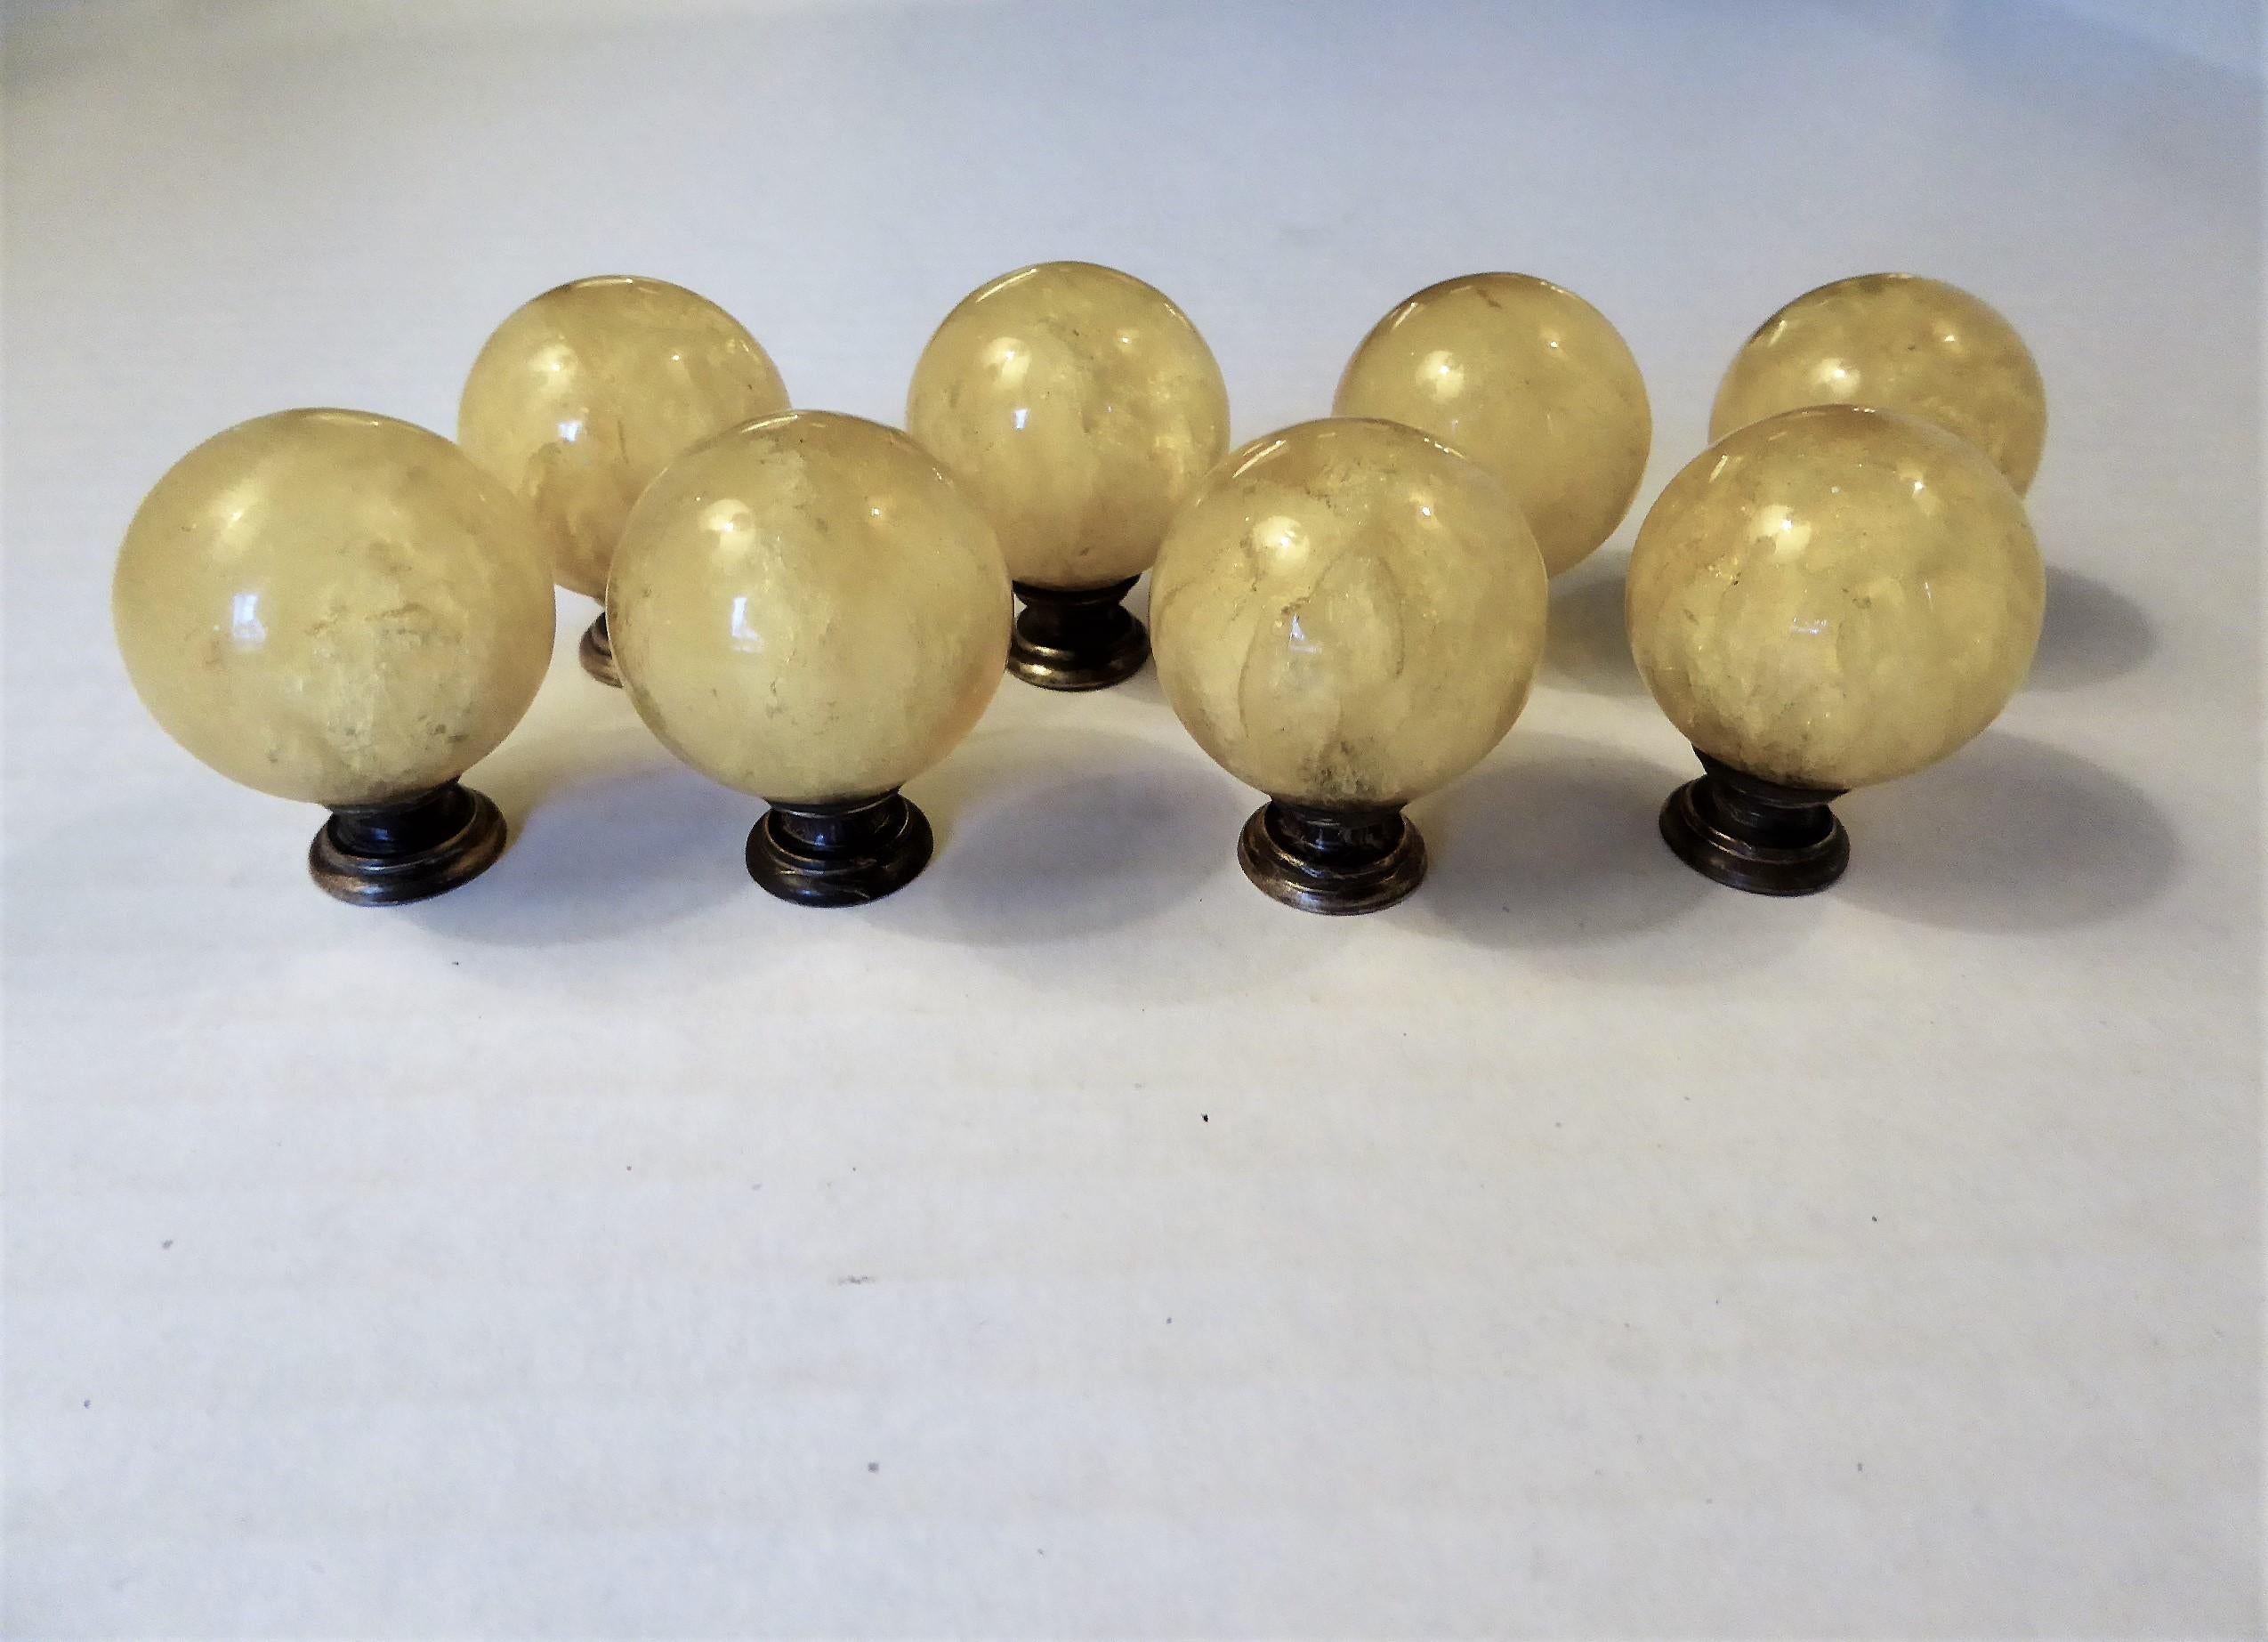 A Luxe set of eight Lucite drawer/cabinet pulls with bubbly inclusions by interior designer, architect and home builder Ruth Richmond of Sarasota, Florida. With dark brass mounts, the slightly amber Lucite balls have interior explosions of bubbles